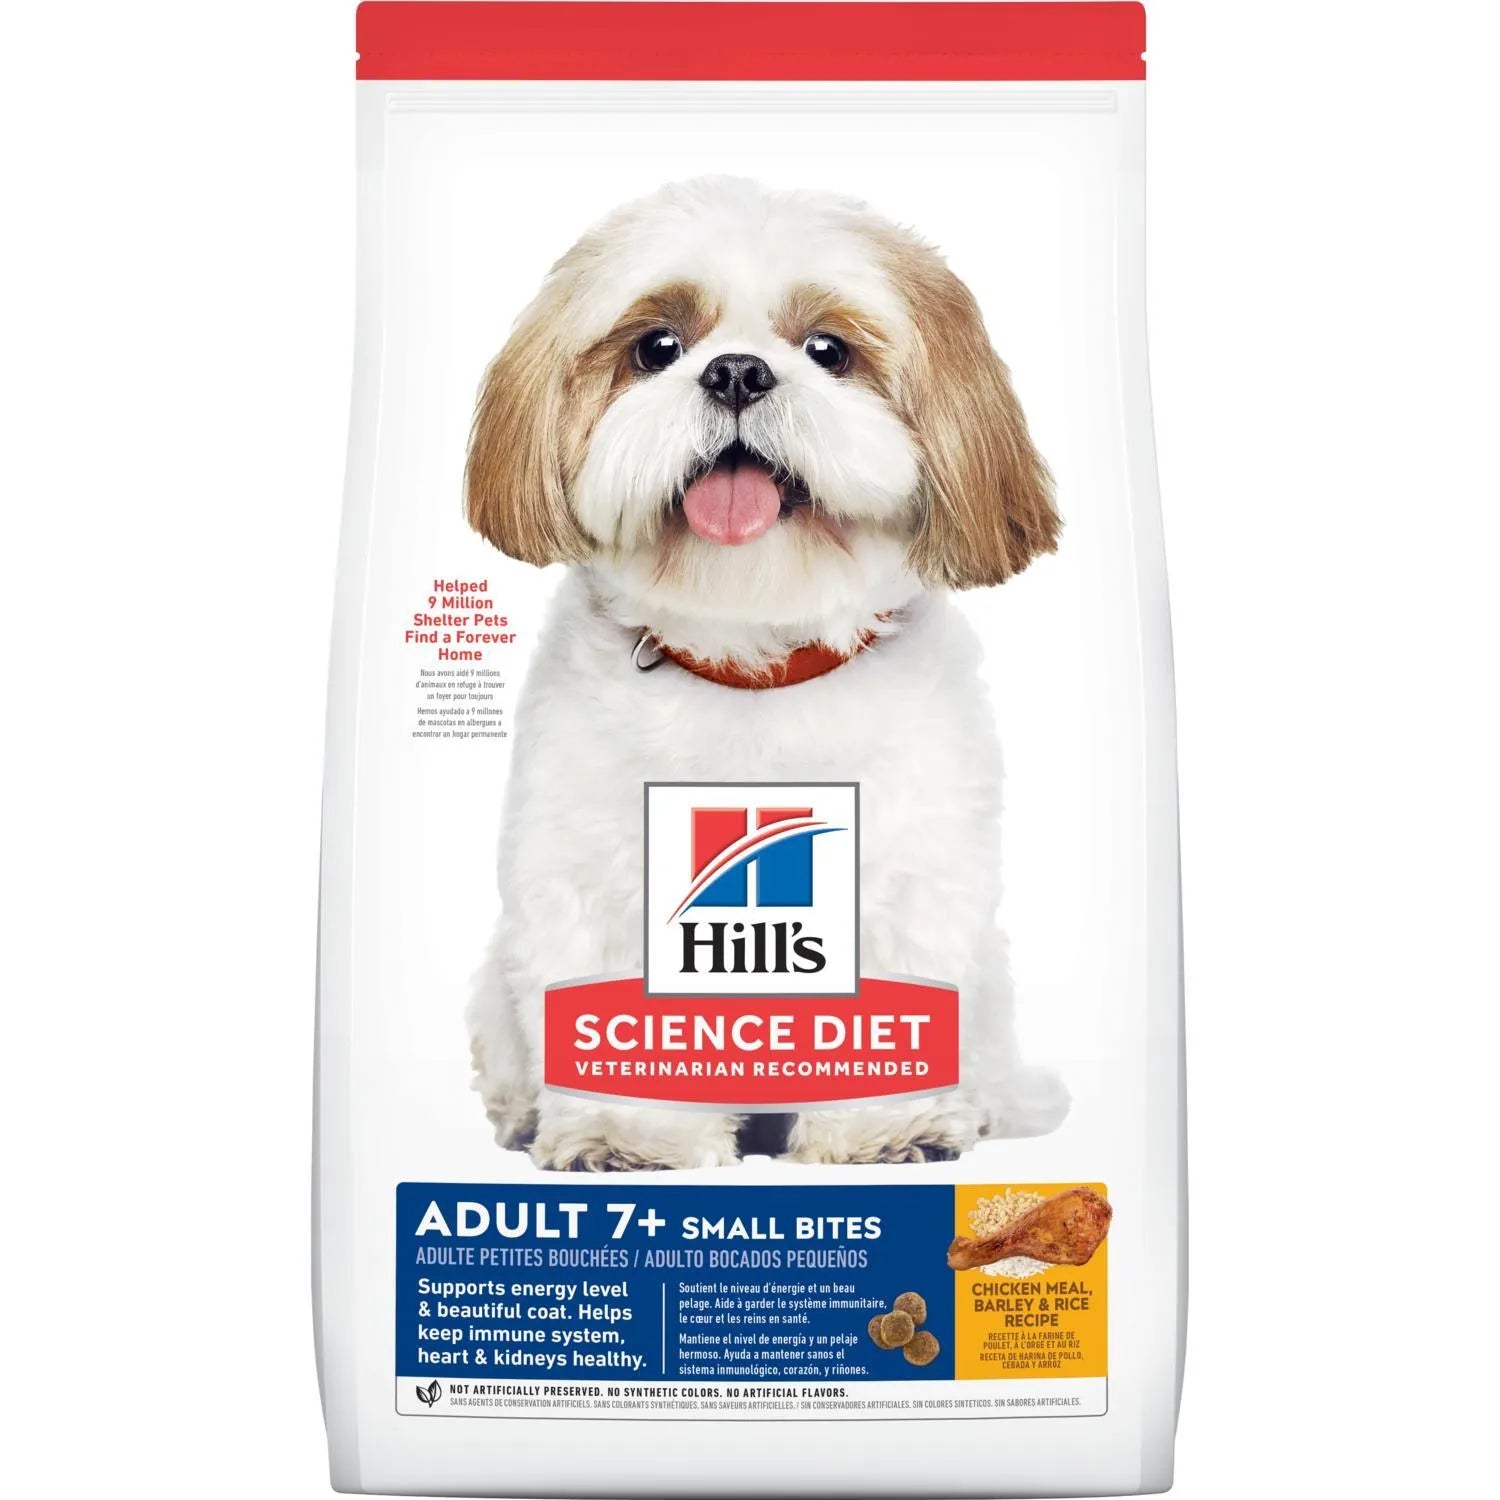 Hill's Science Diet Puppy Small Paws Dry Dog Food, Chicken Meal